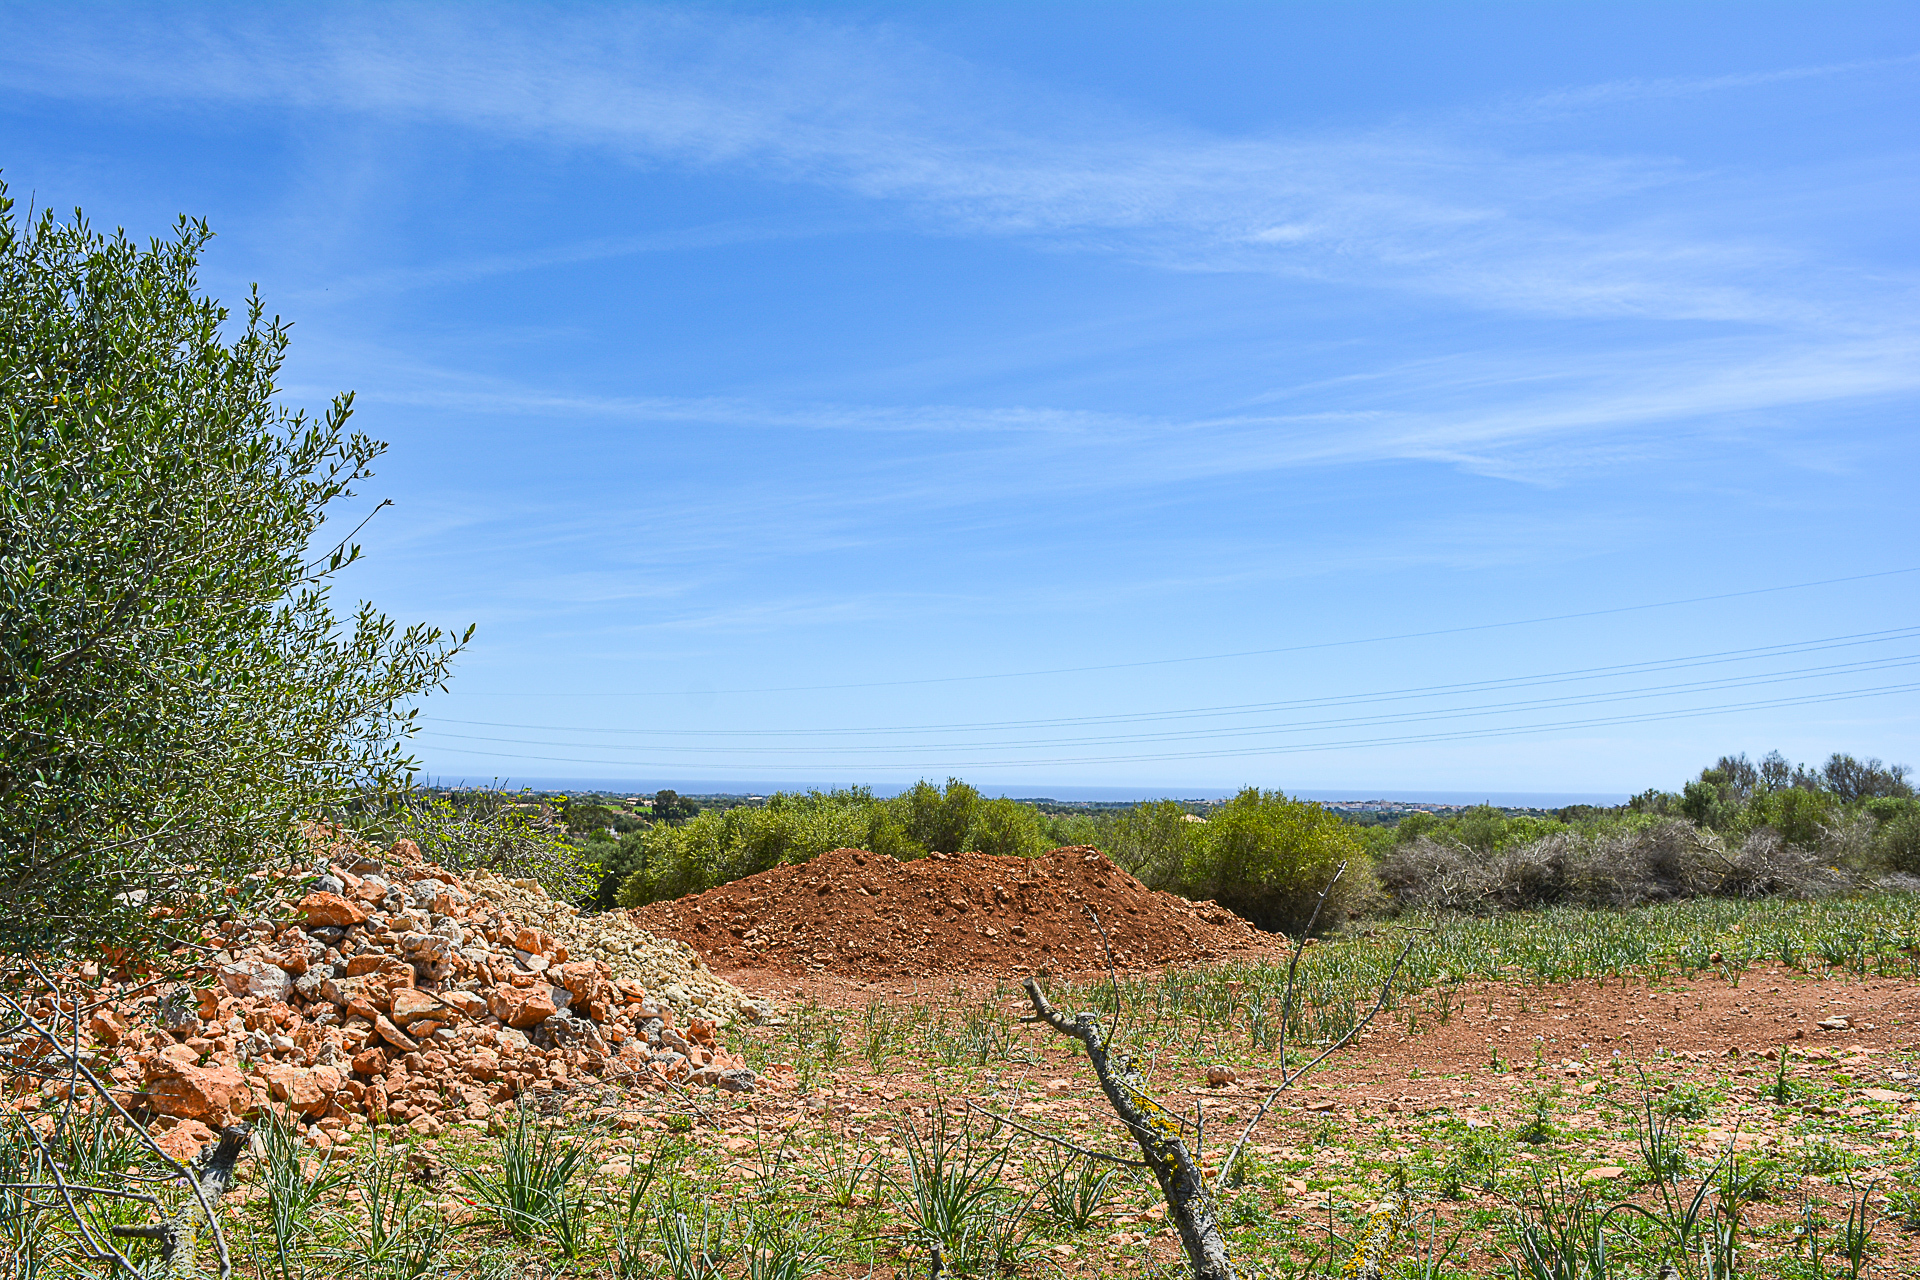 Building plot in attractive location with building permit and distant sea views, 07500 Manacor (Spain), Residential plot